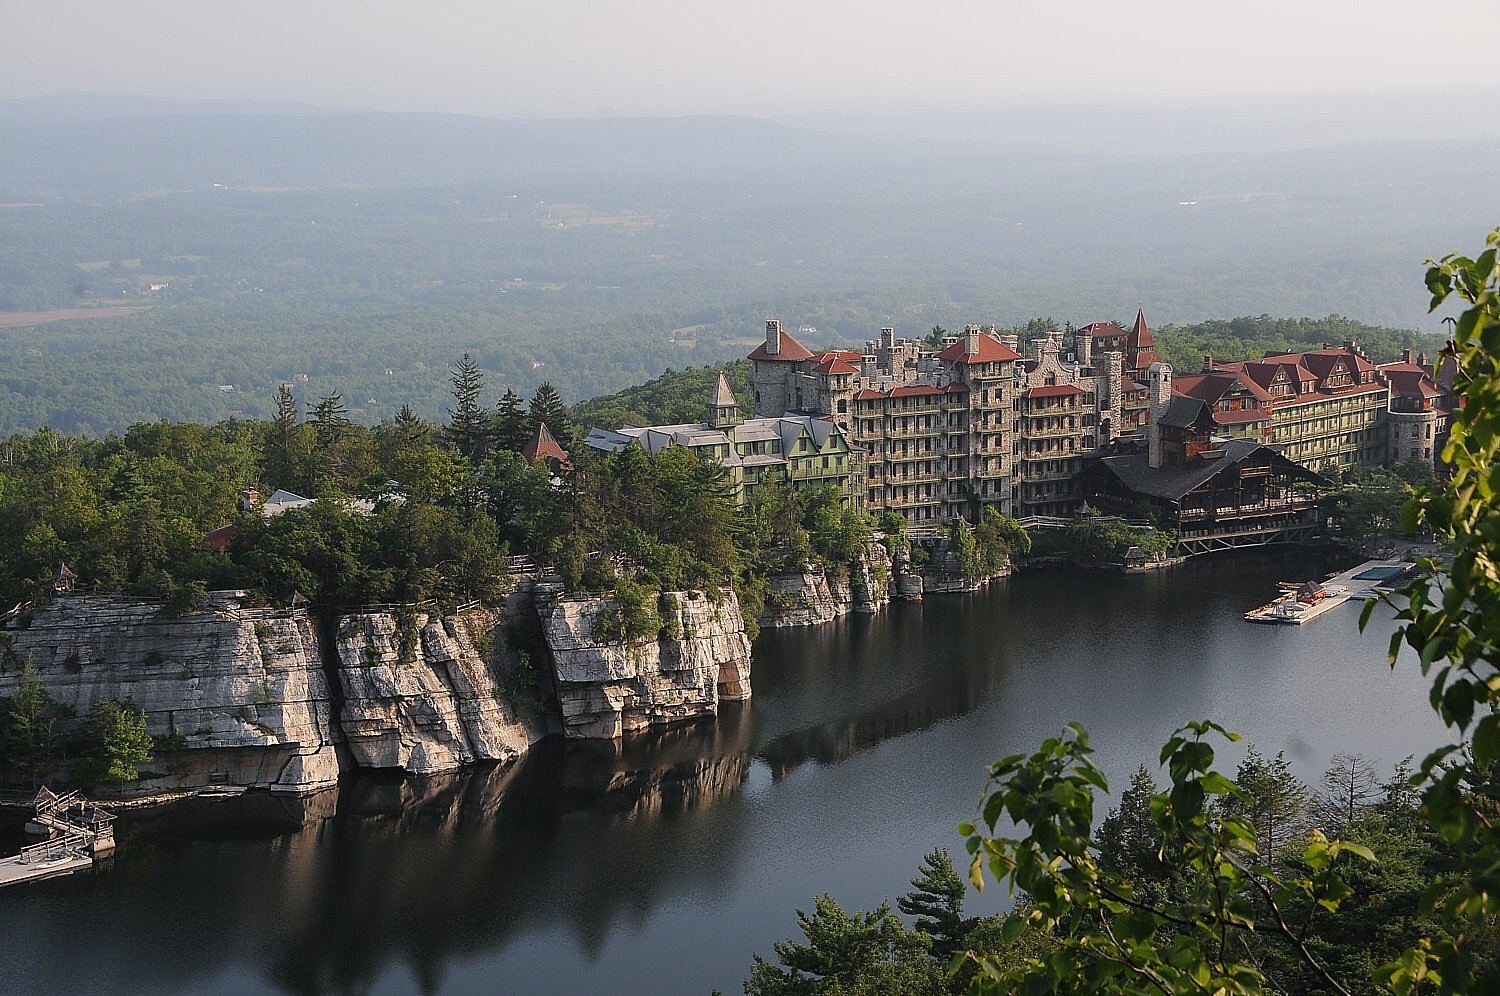 Mohonk Mountain House (1869) New Paltz, New York, still owned and managed by the Smiley Family, is a finalist for Legendary Family Historic Hoteliers of the Year © 2016 Karen Rubin/goingplacesfarandnear.com